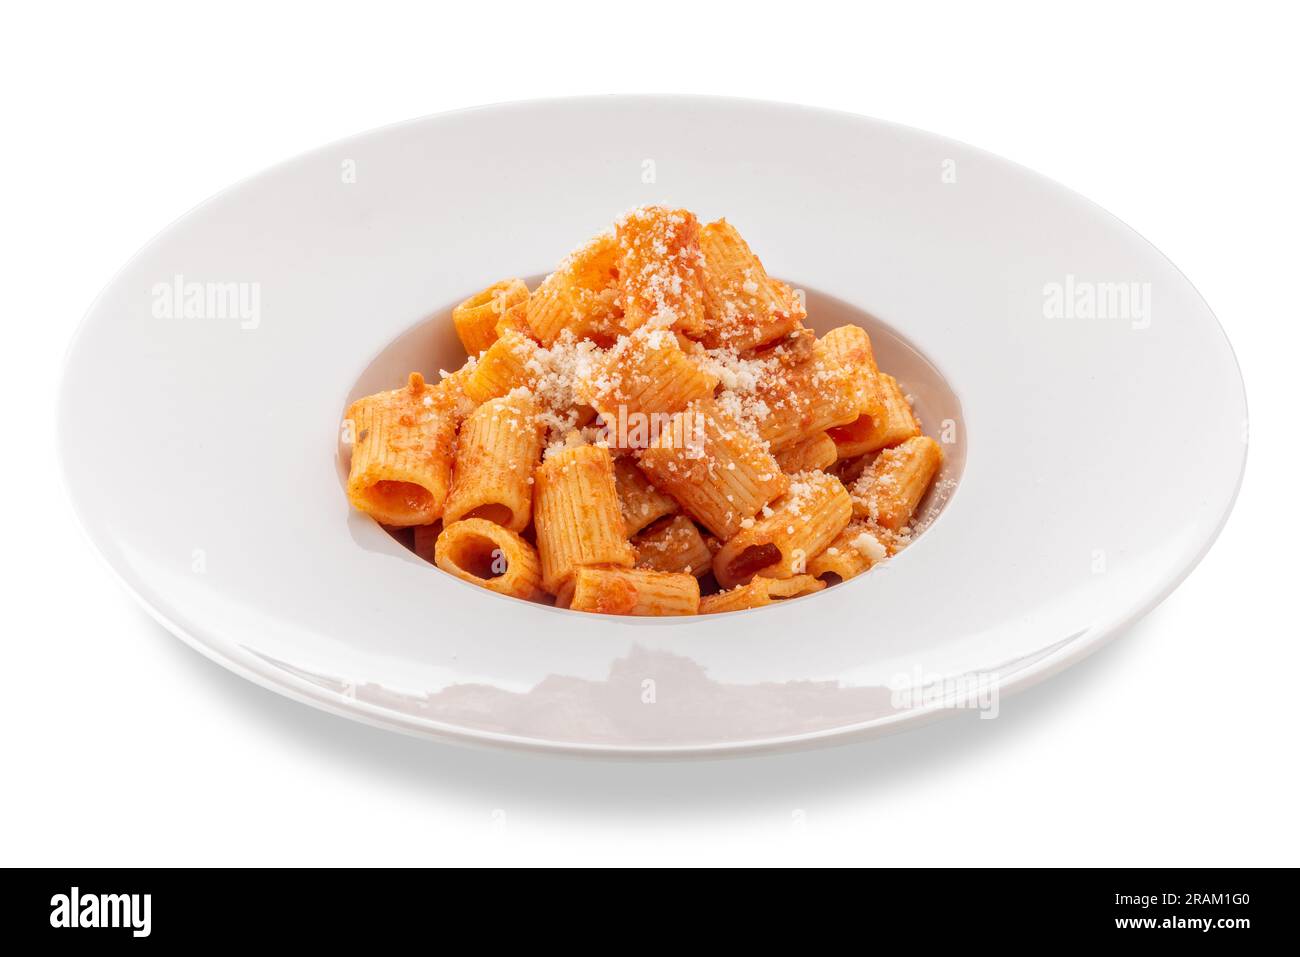 Mezze maniche macaroni with red tomato sauce and grated parmesan cheese in white plate, isolated on white, clipping path included Stock Photo